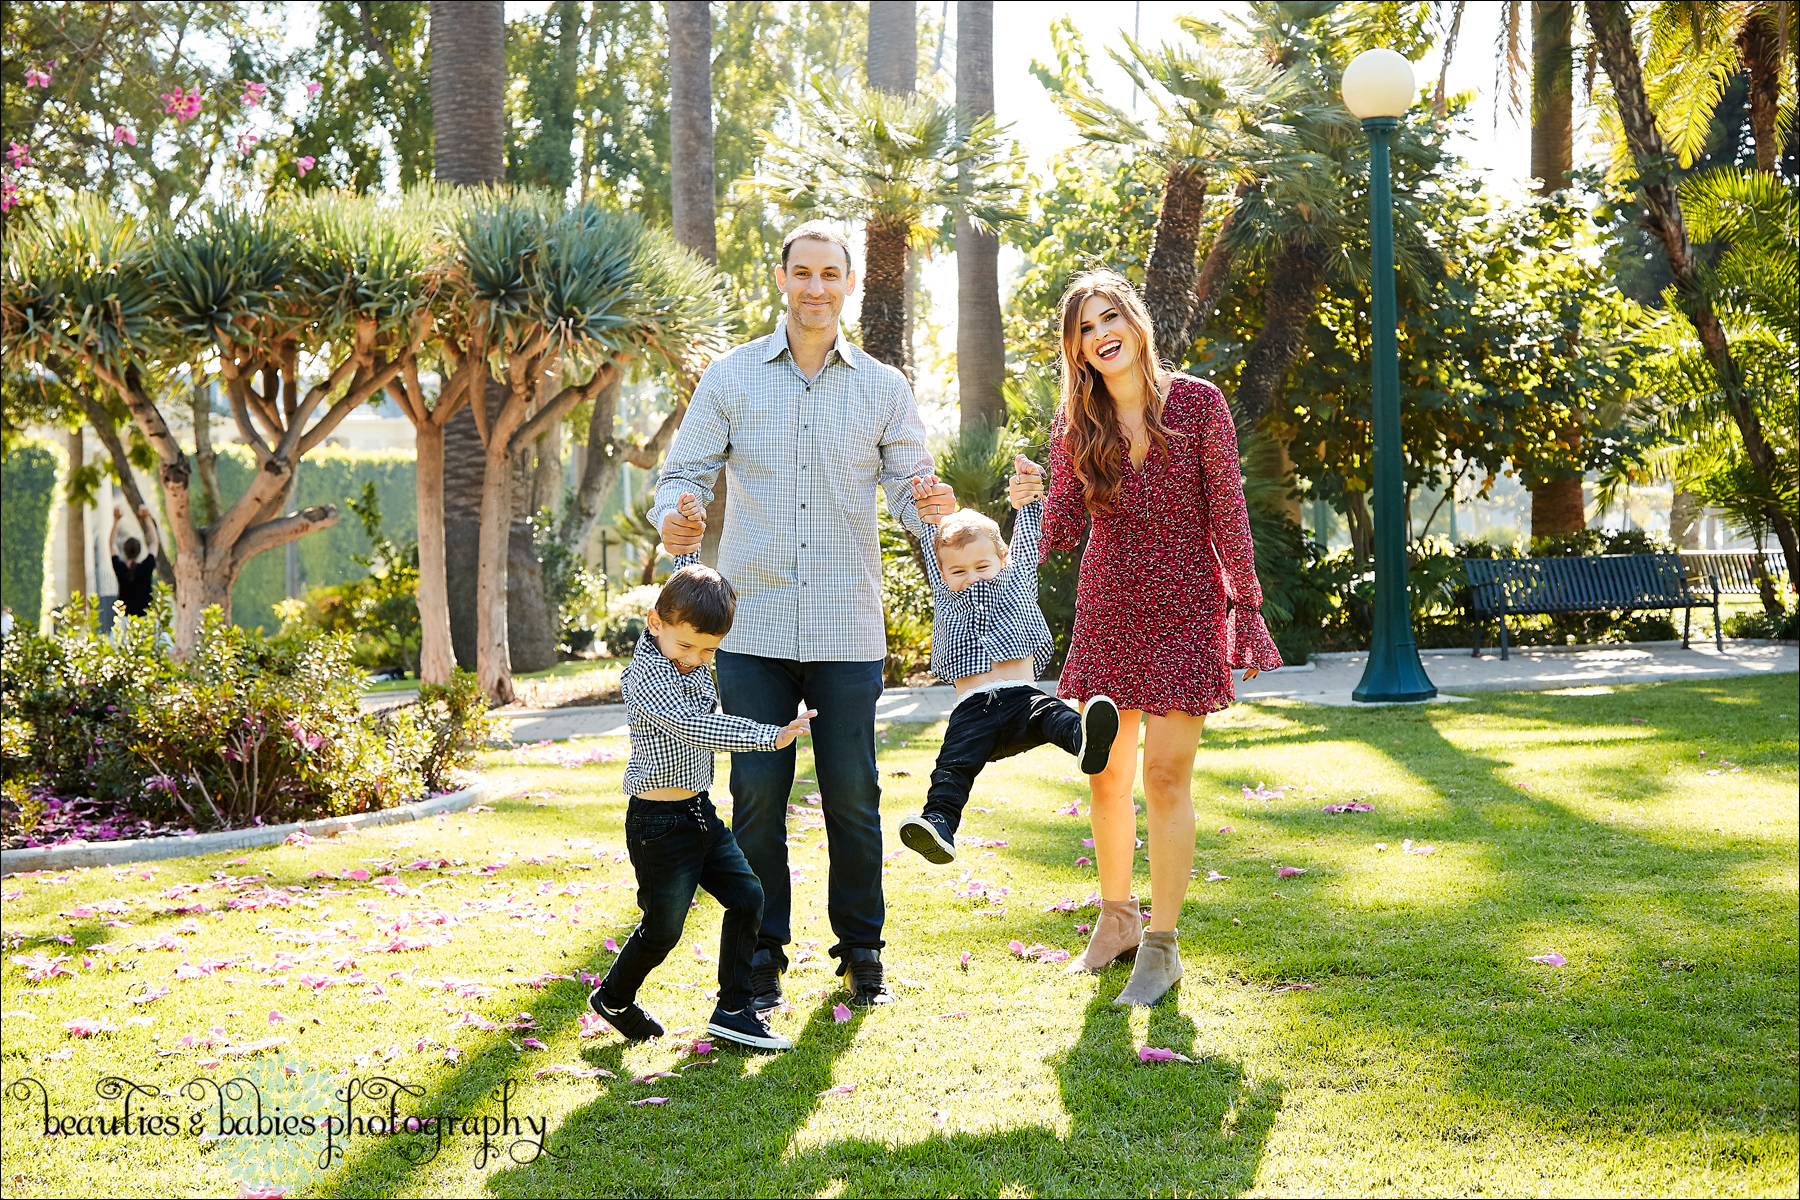 Outdoor family photography Los Angeles children's photographer